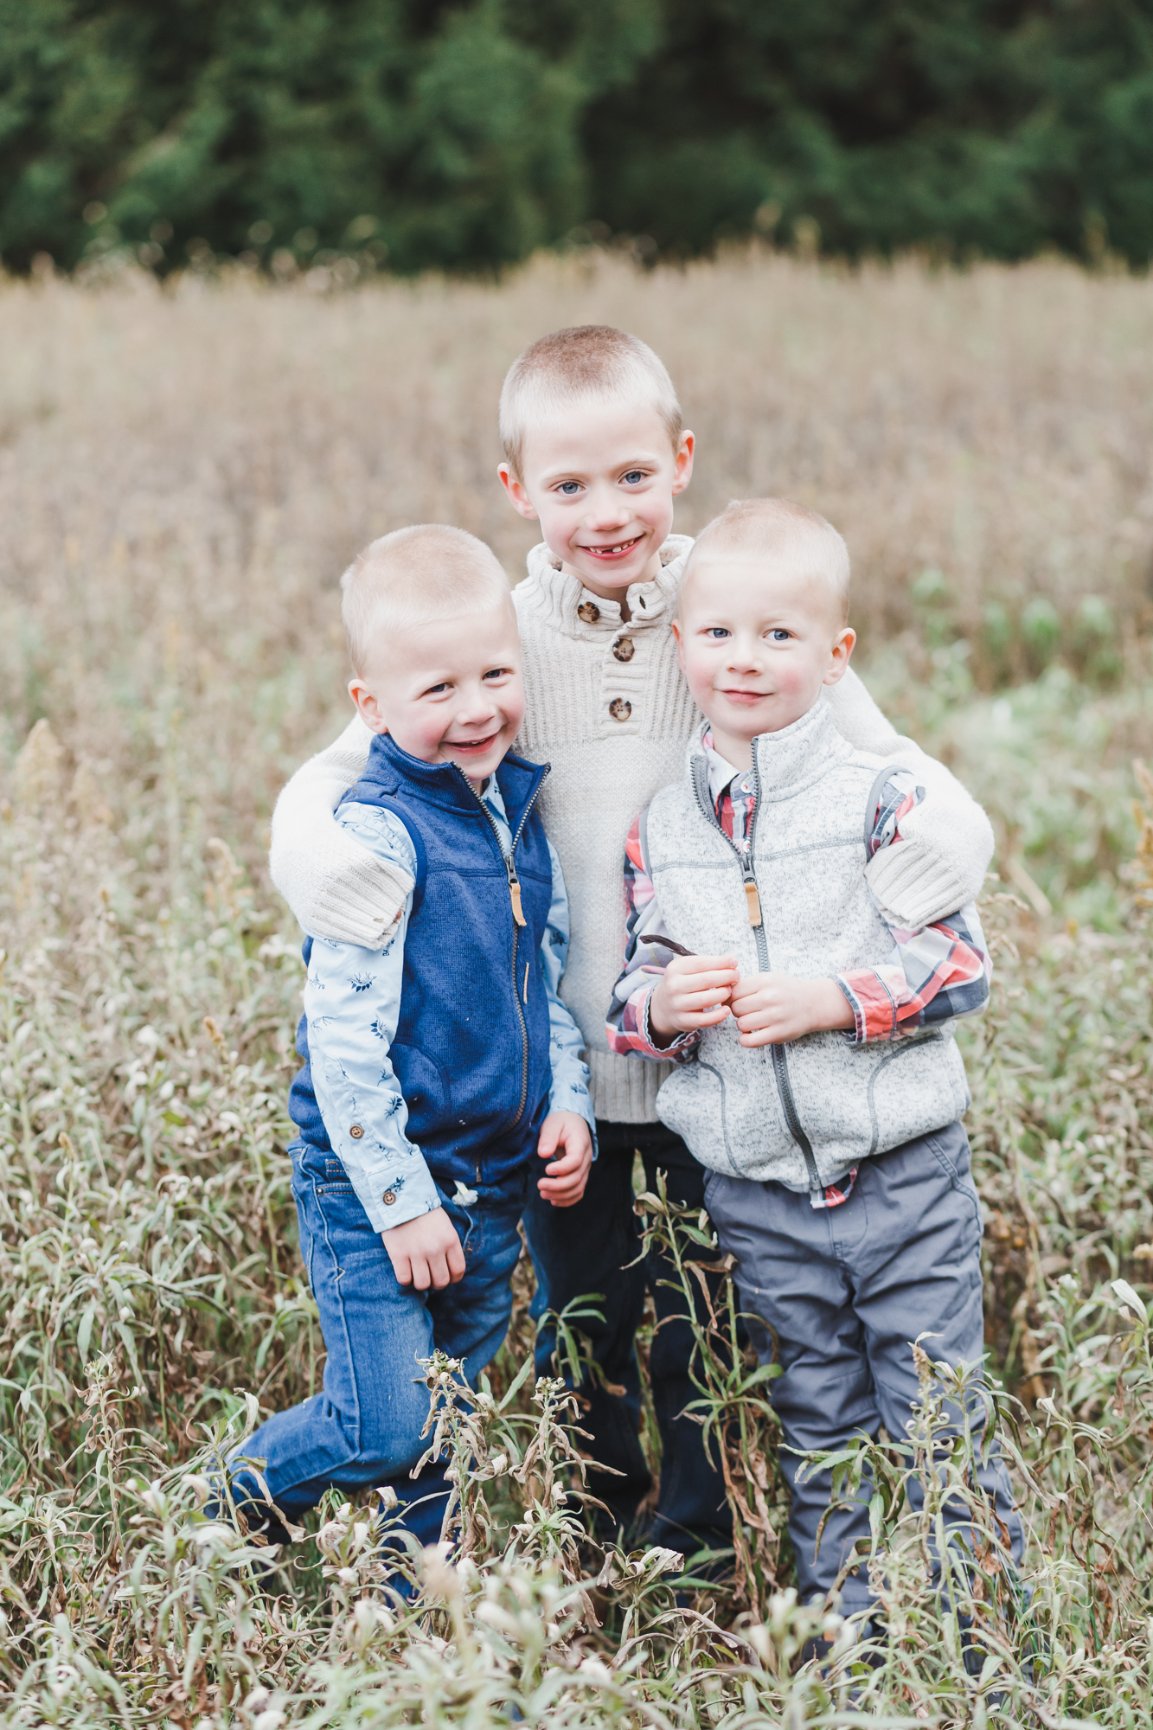 Double Trouble + One big brother - Family Portraits - Wyomissing, PA ...